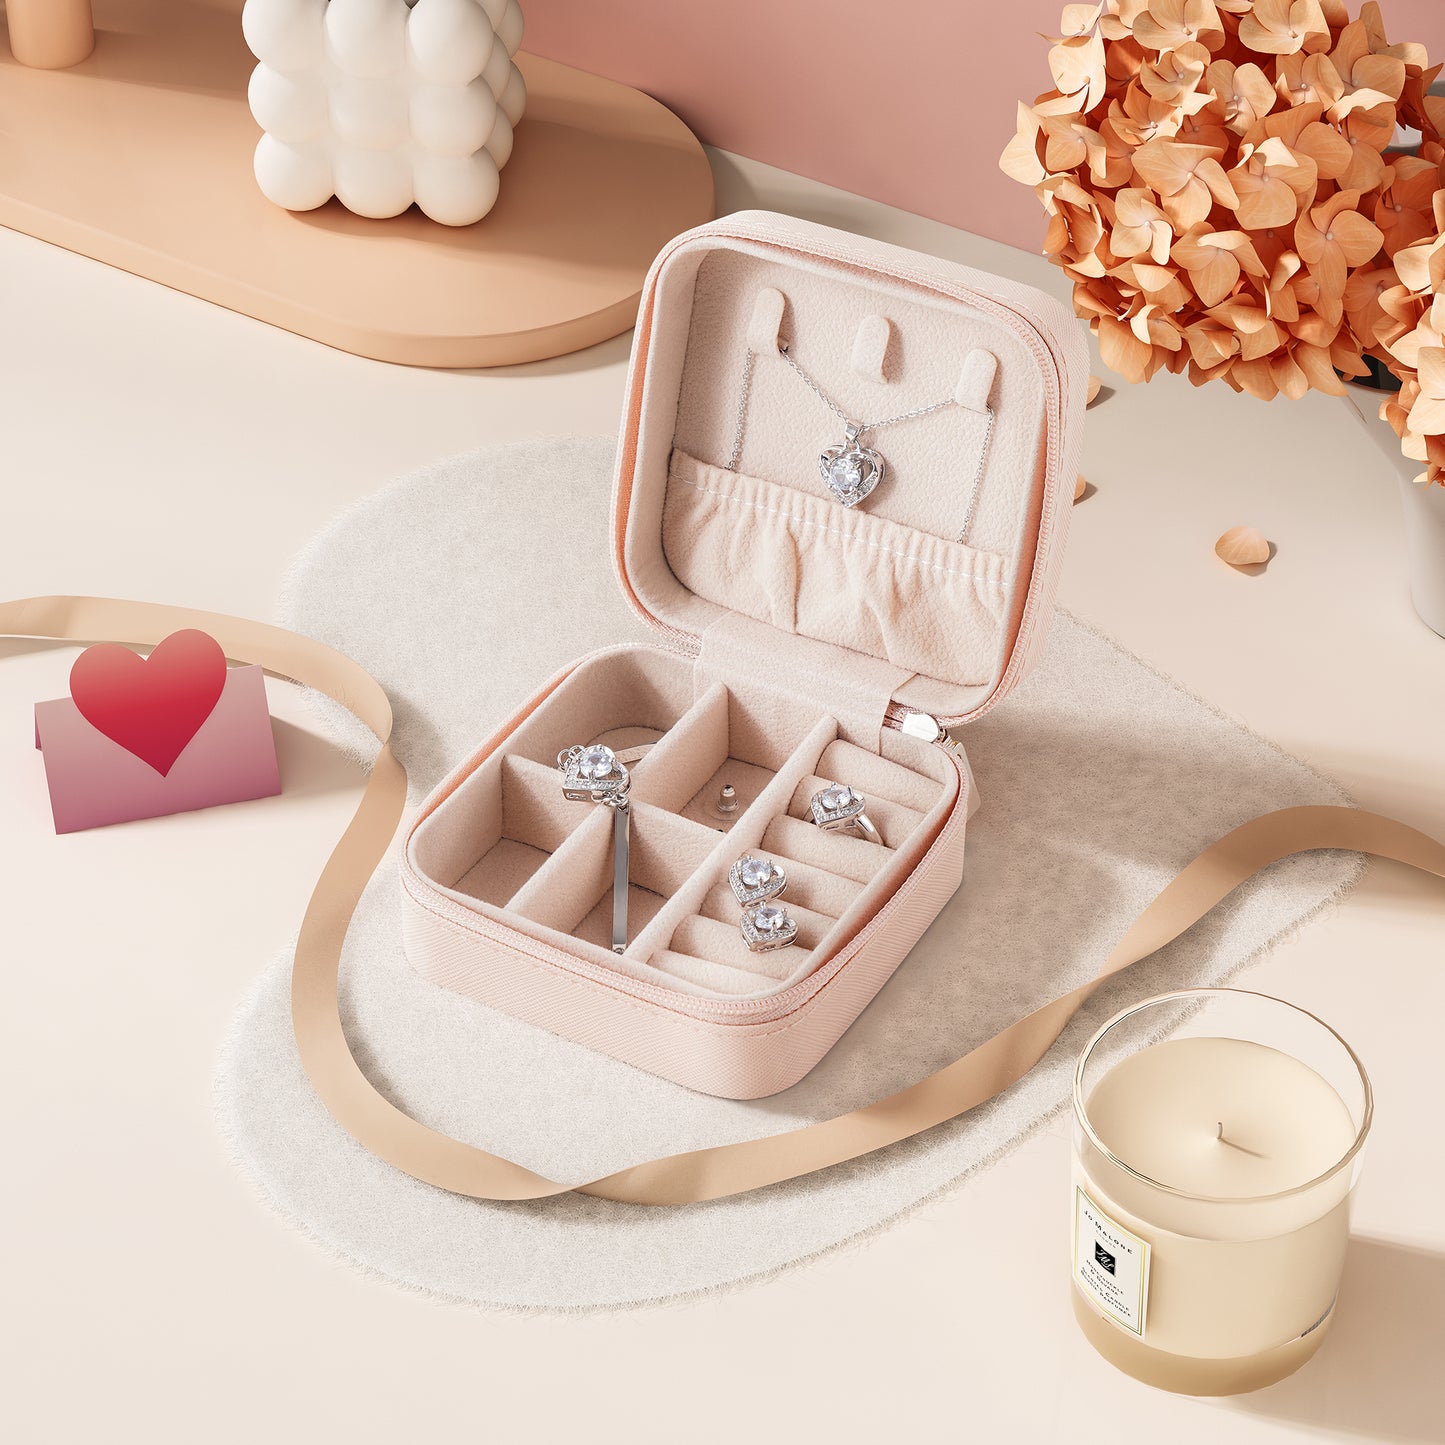 CASEGRACE Eternal Love Jewelry Gift Box for Valentine's Day